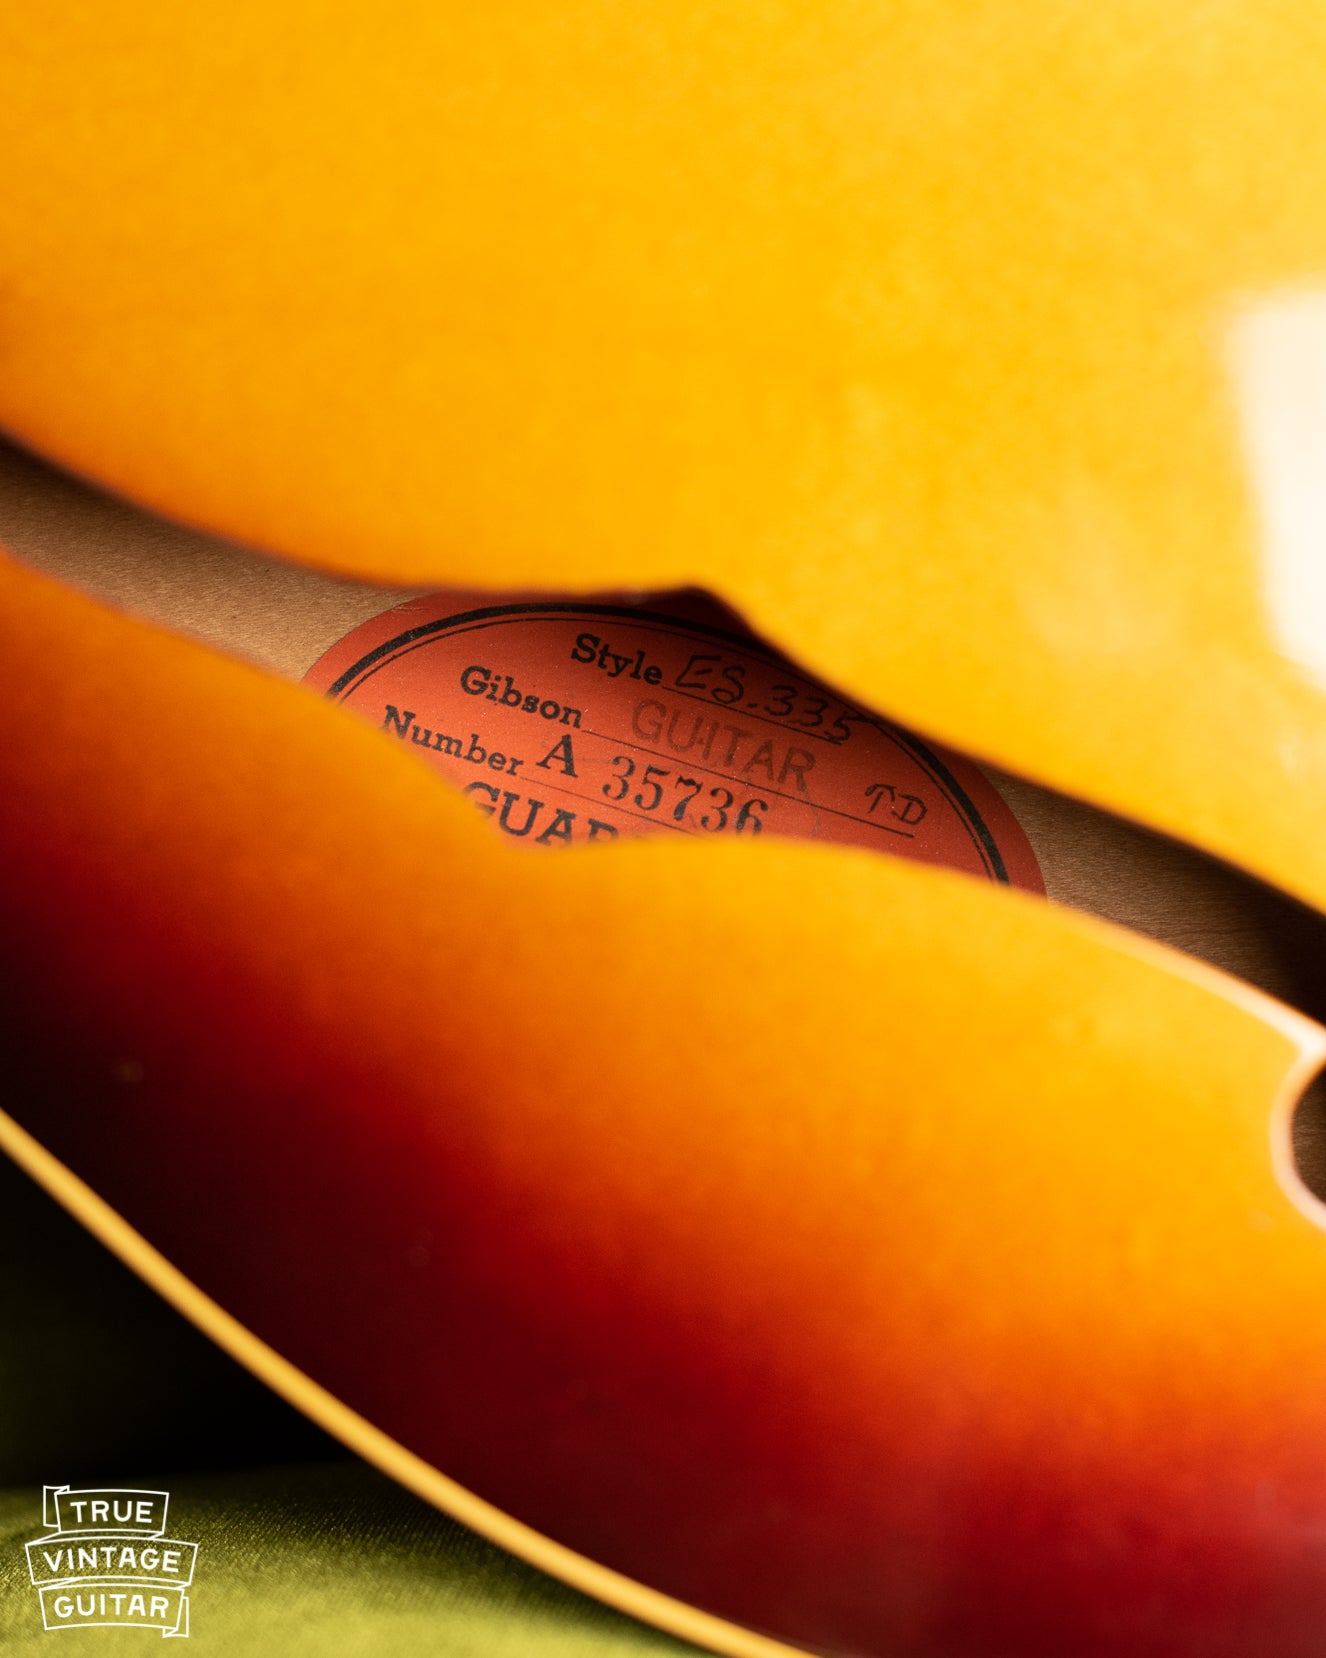 How to date a Gibson ES-335 with serial number